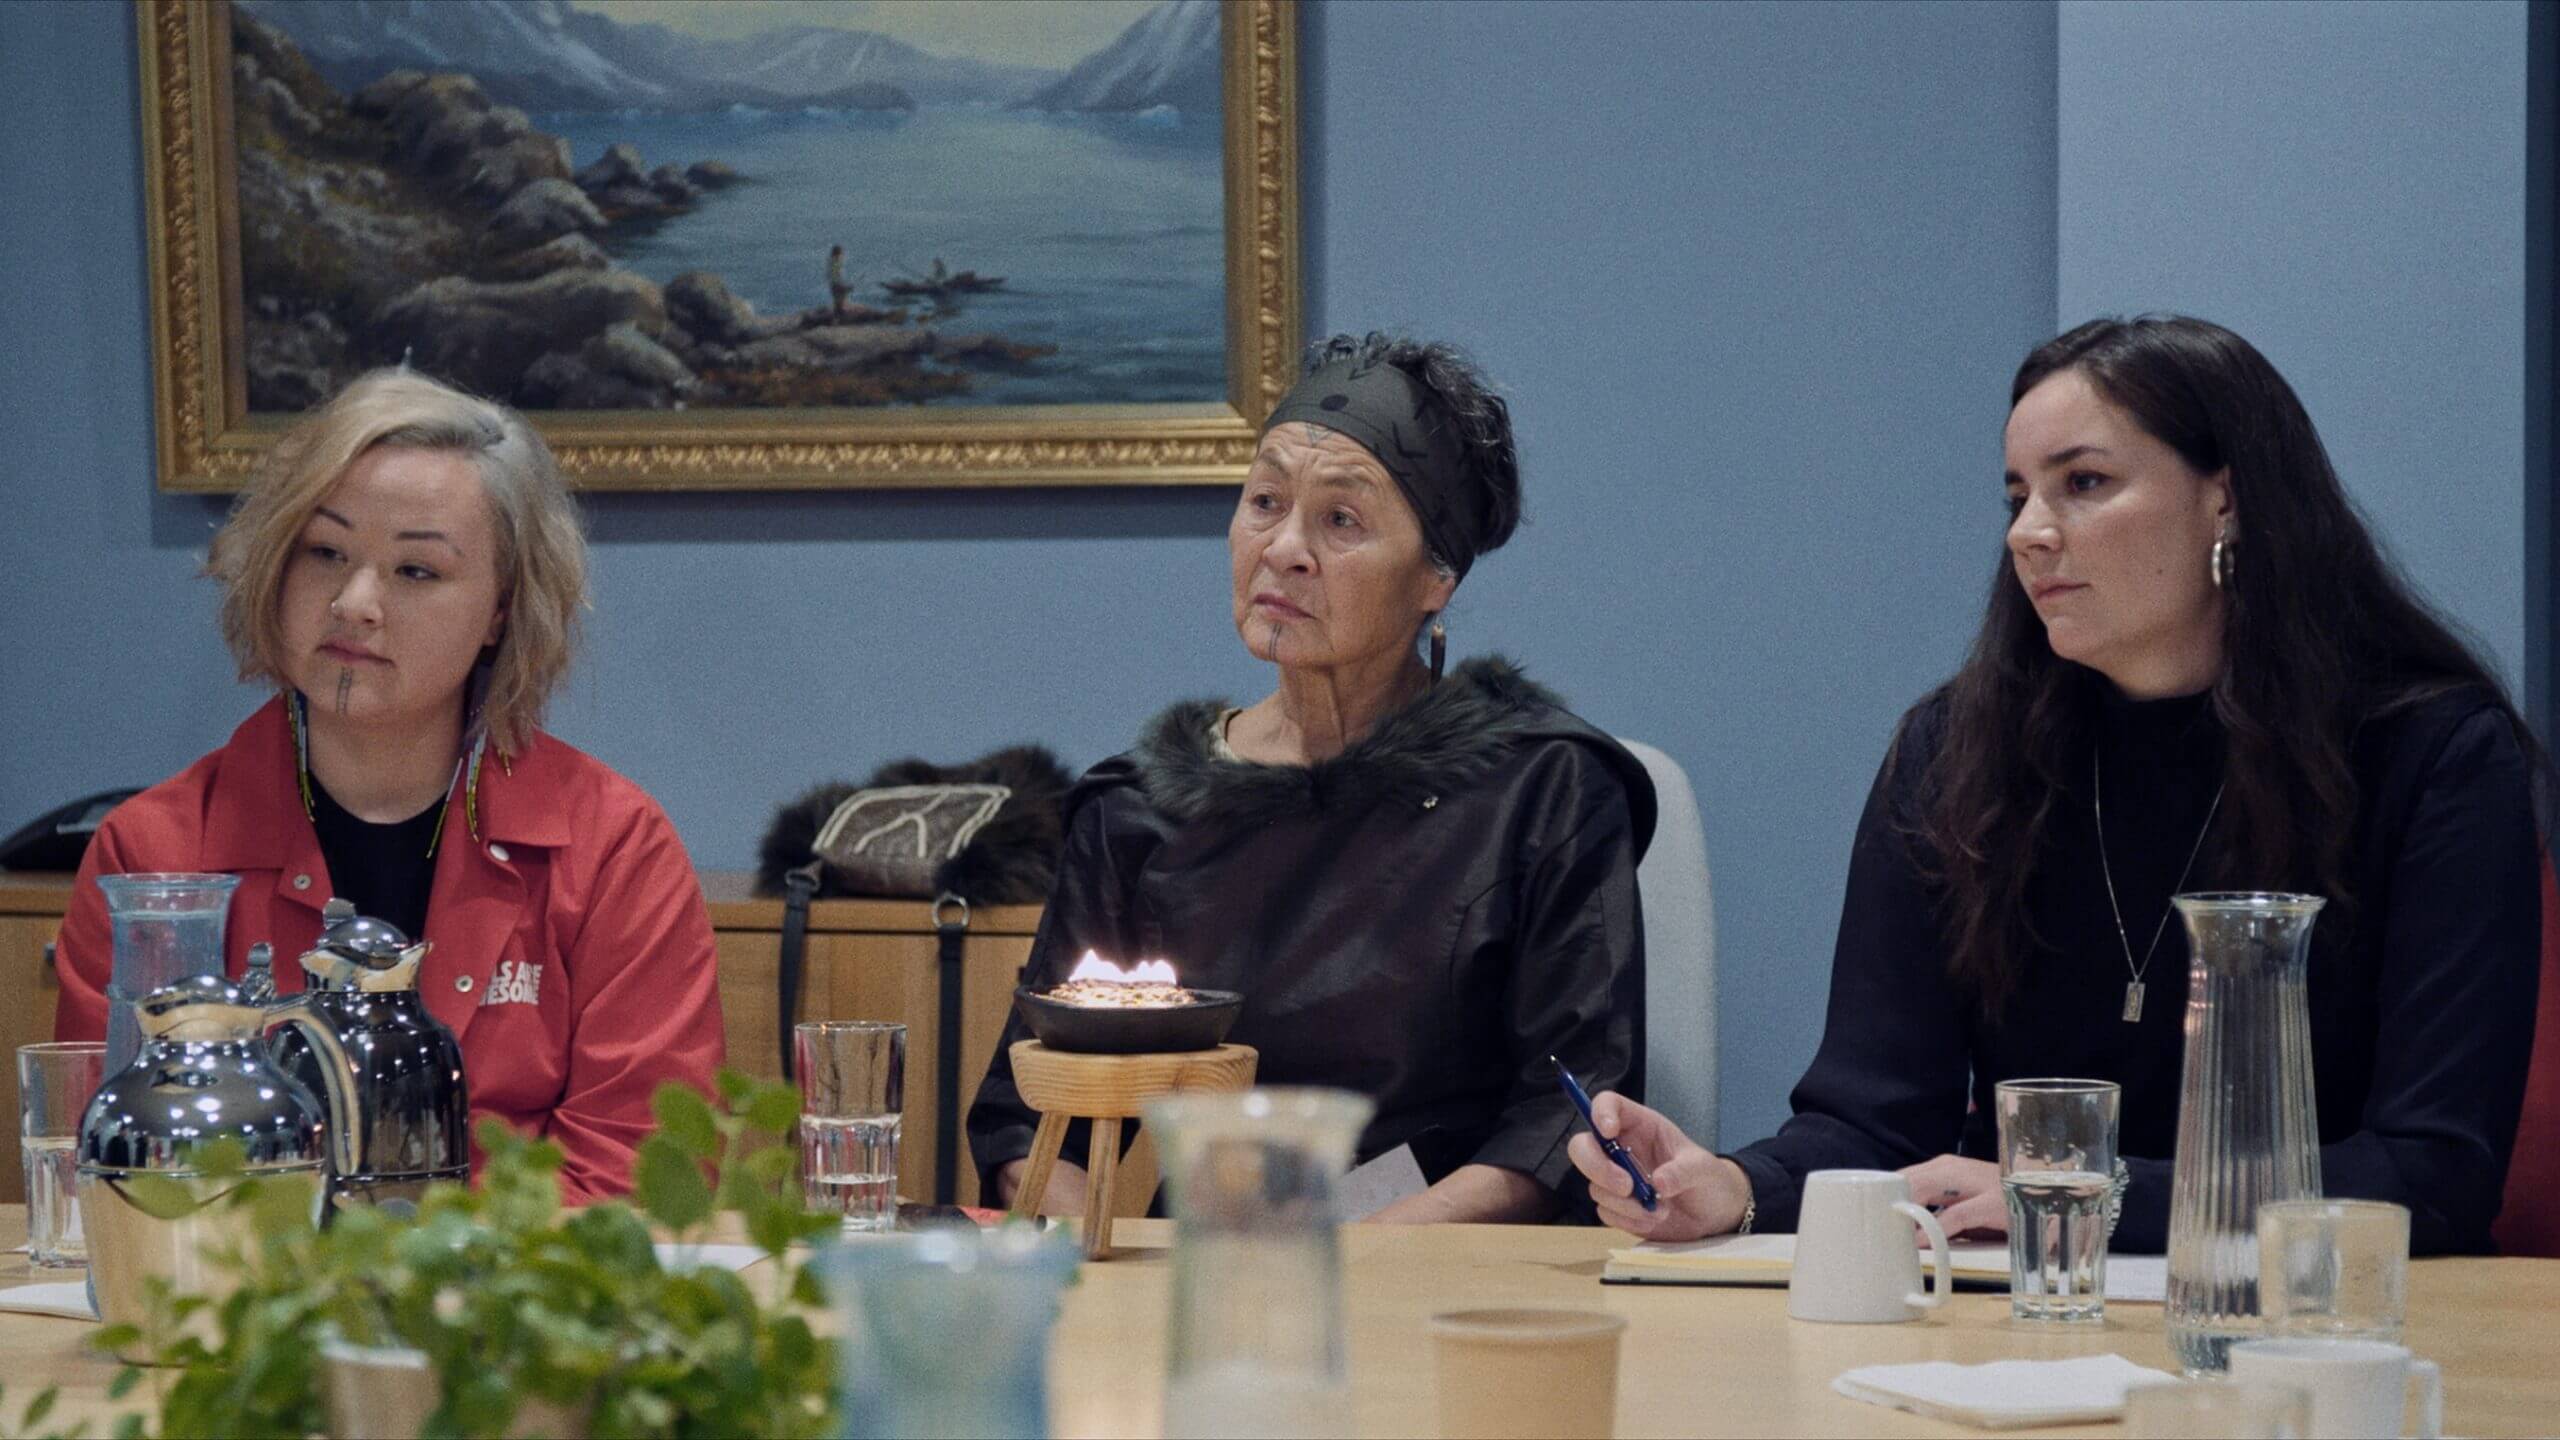 The main character of Twice Colonized, Aaju Peter, is in a meeting and is sitting next to two young fellow Inuit activist. There is a traditional Greenlandic oil lamp, a qulleq, in front of her, and all three women are looking serious but hopeful.